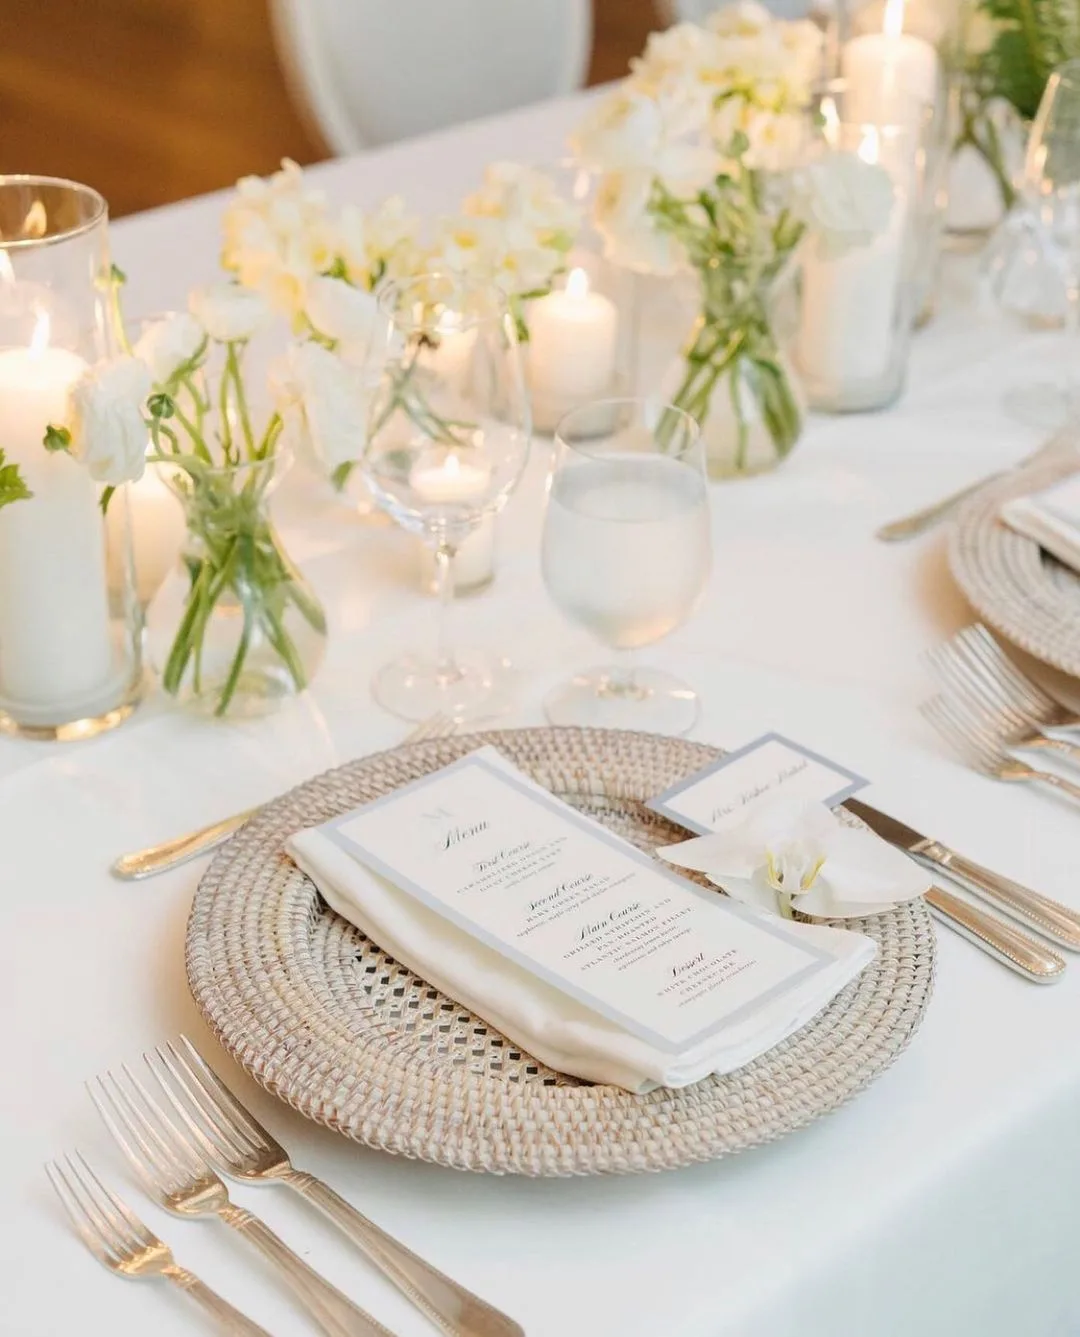 White Roses, White Candles, And Whicker Plates